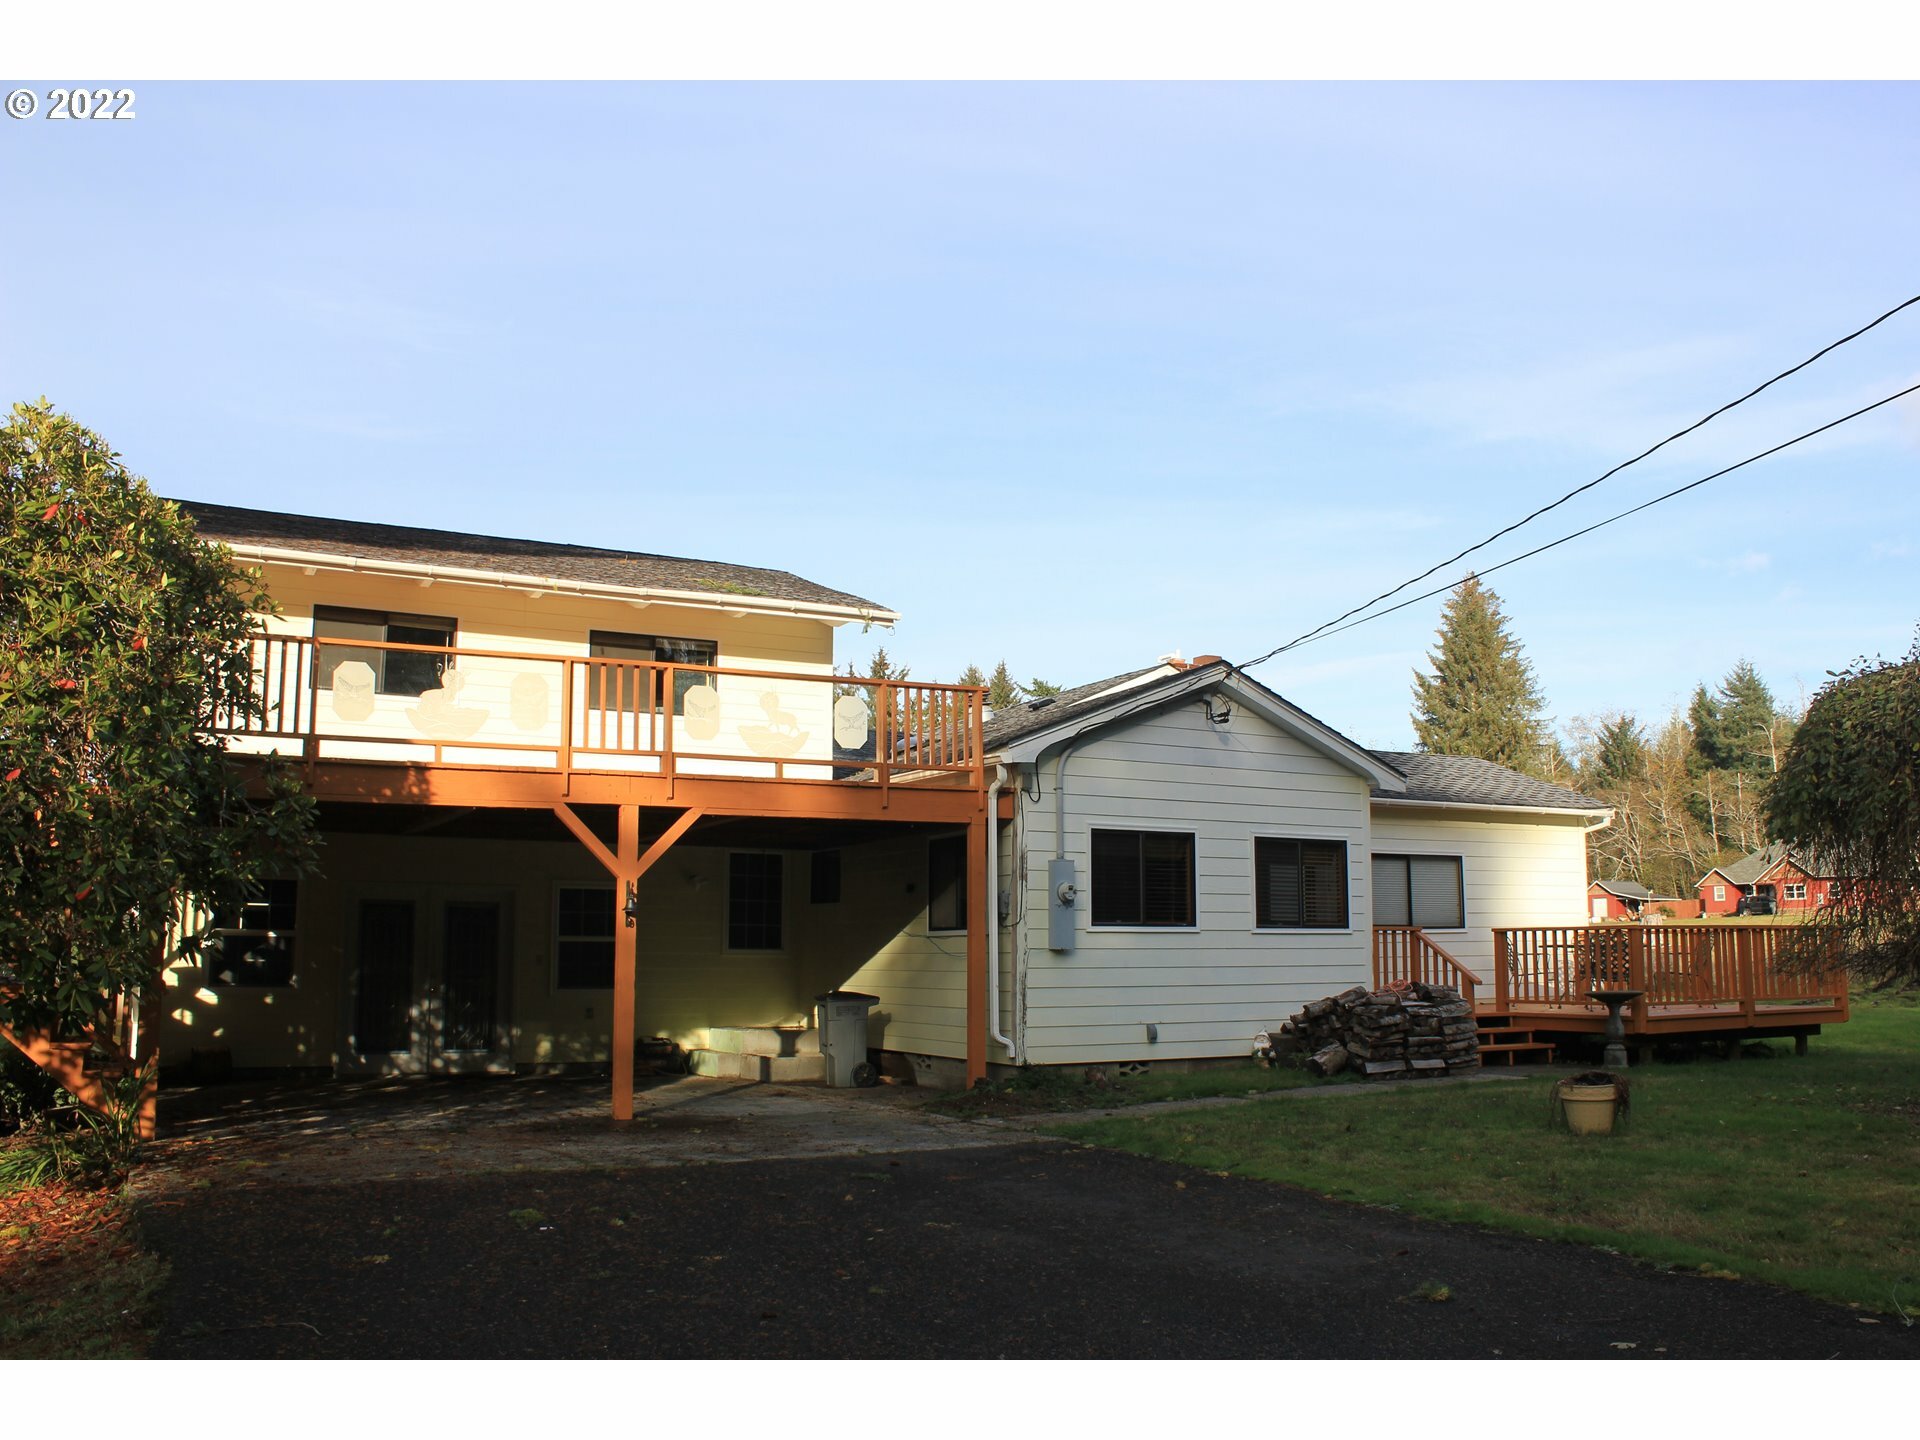 91779 George Hill Rd  Astoria OR 97103 photo